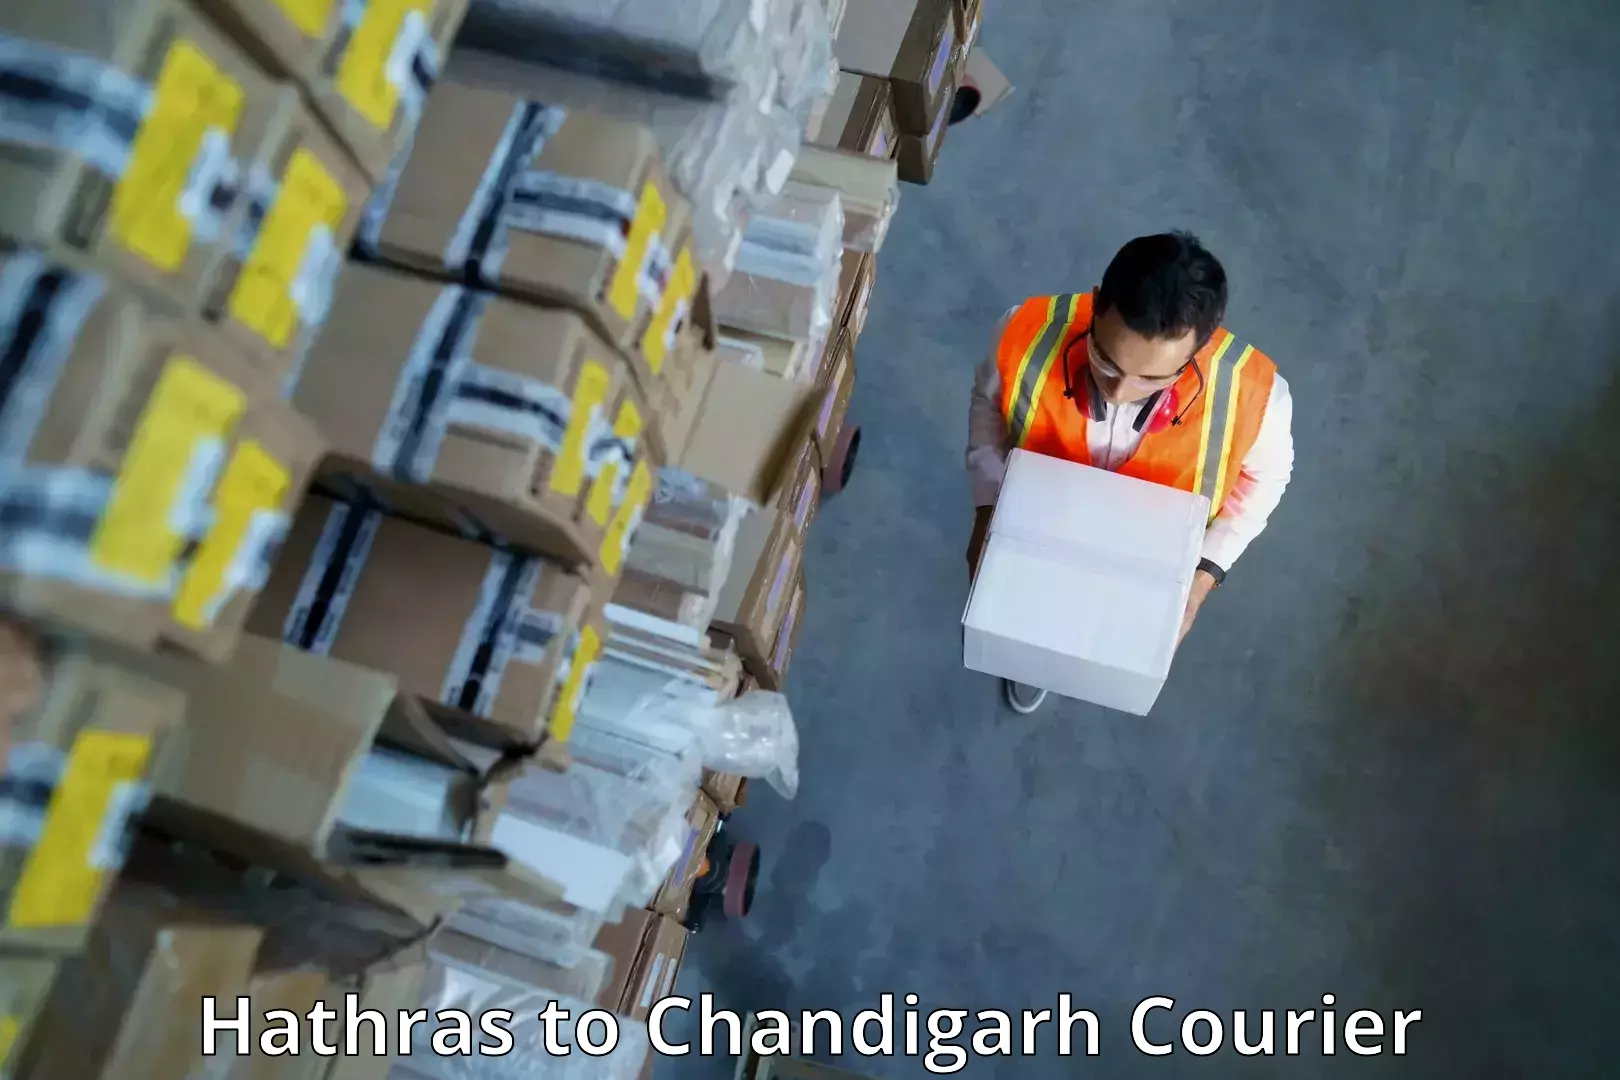 State-of-the-art courier technology Hathras to Chandigarh